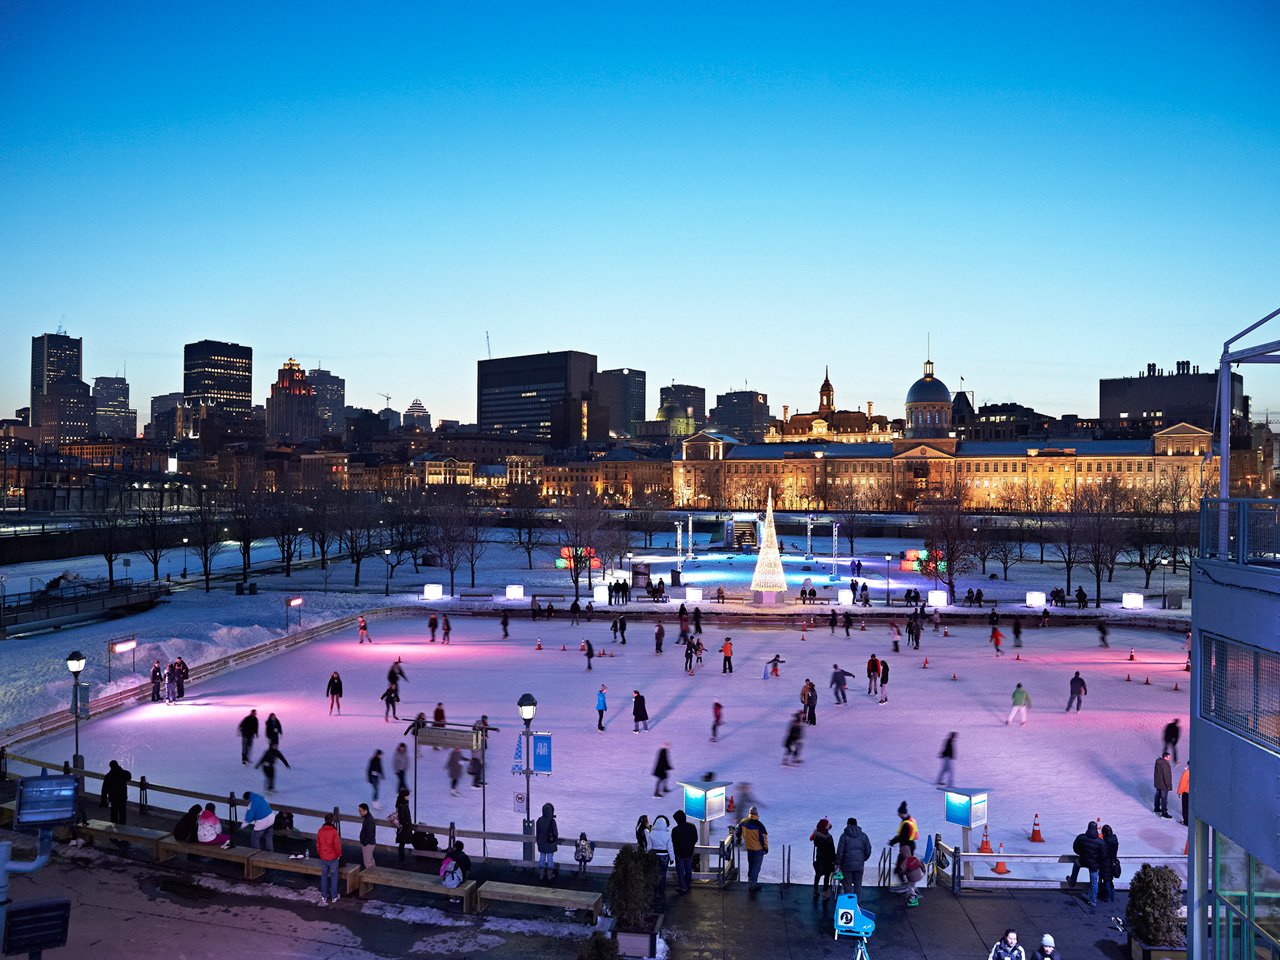 11 awesome outdoor skating rinks in Canada